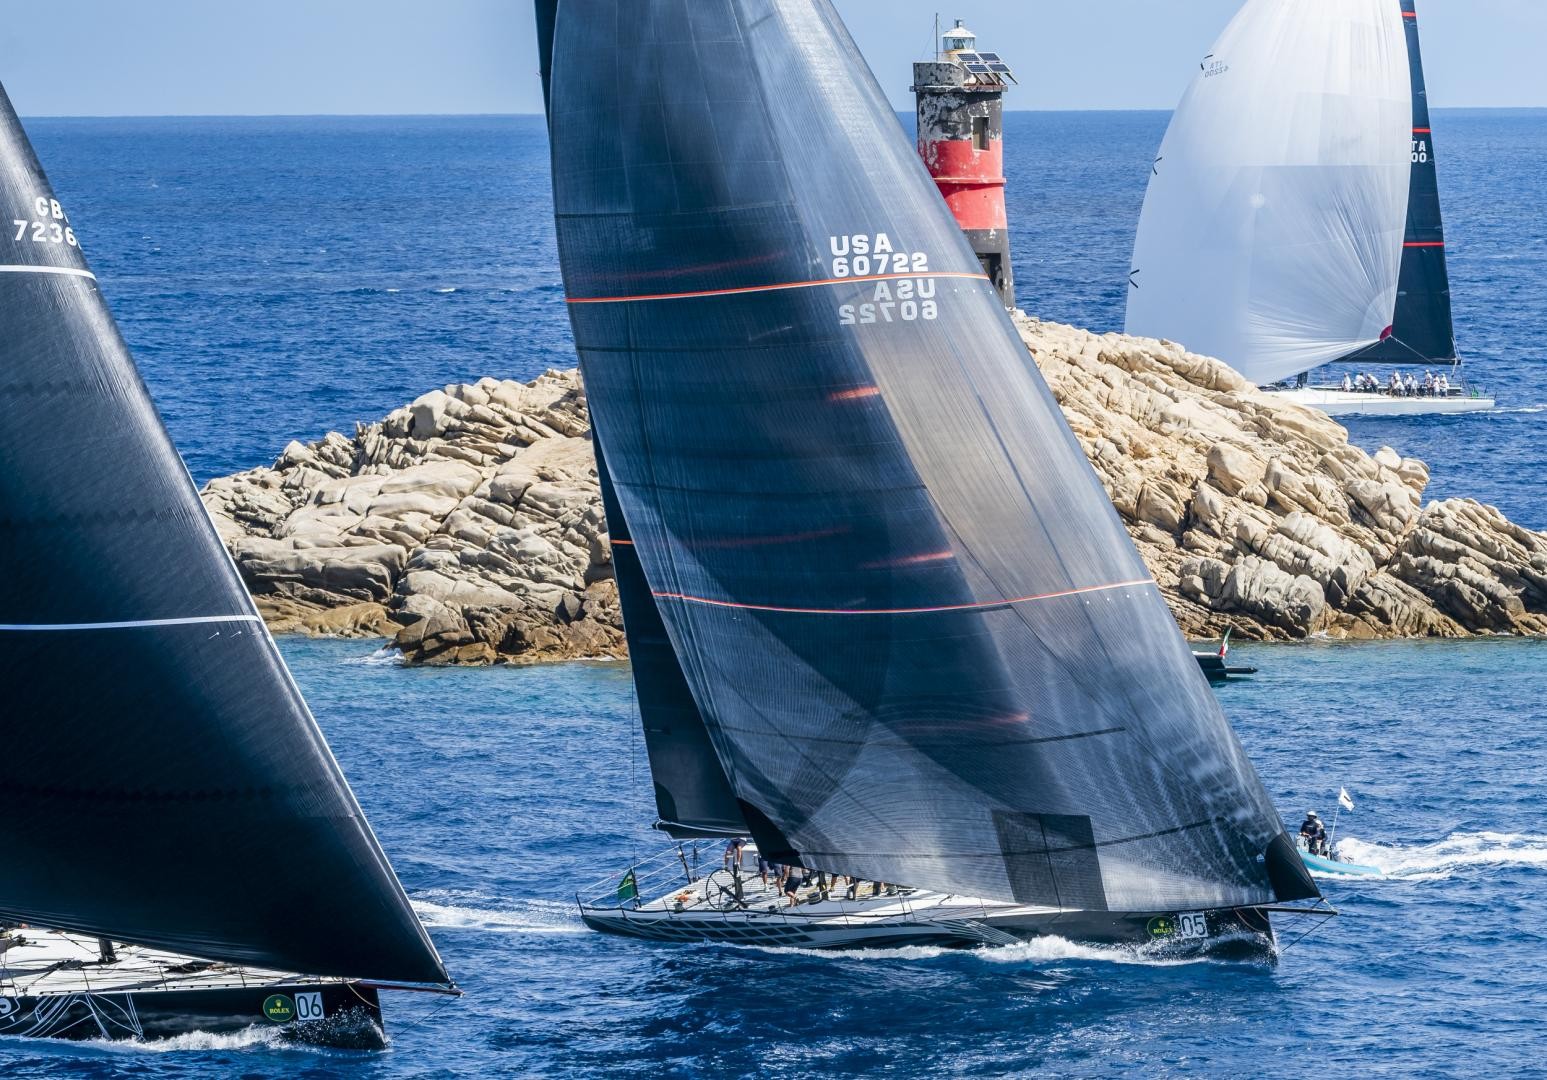 Rolex Maxi 72 World Championship competition on today's coastal course